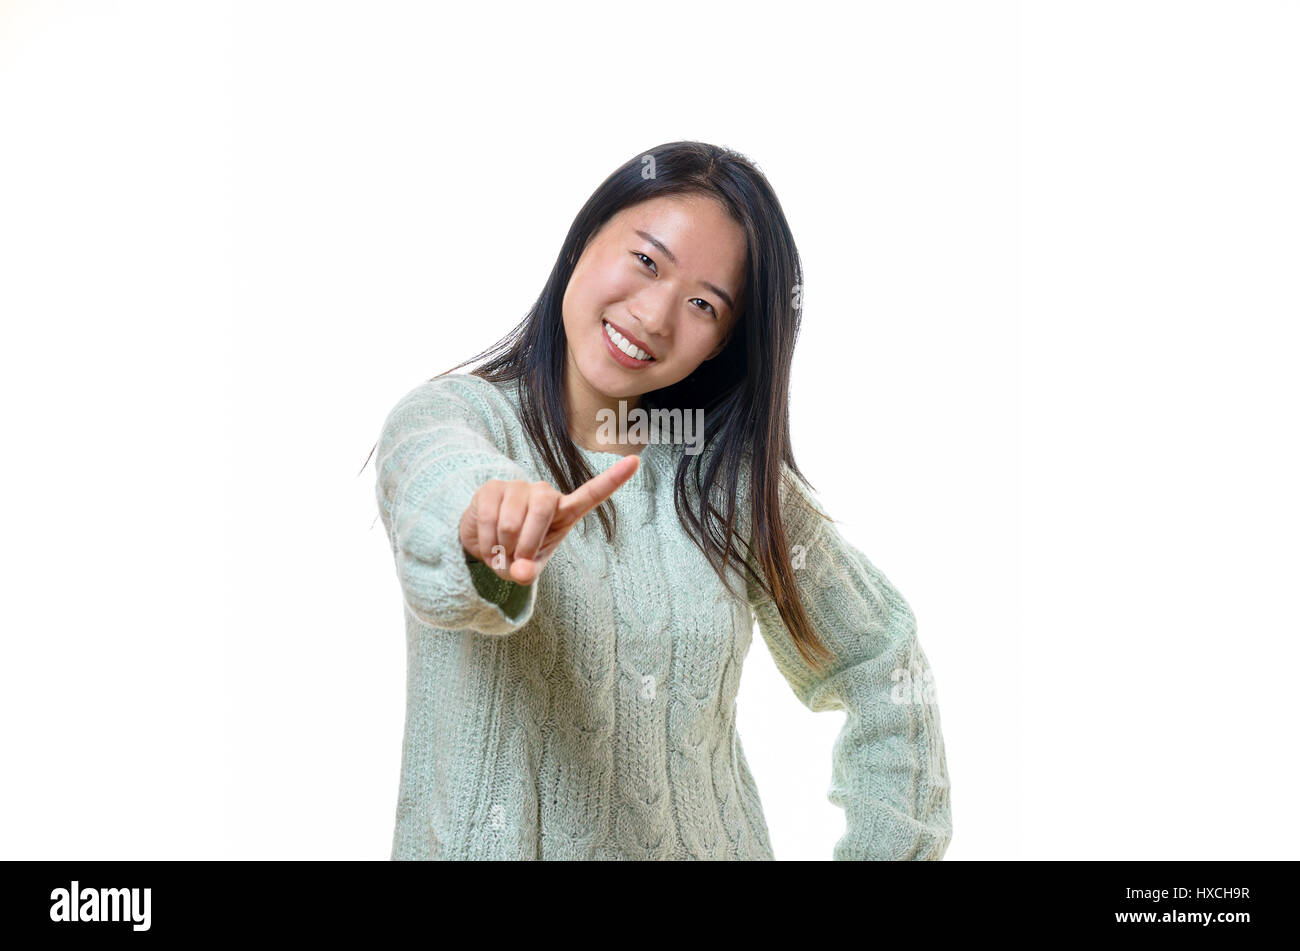 Cute young Chinese woman wagging her finger at the camera admonishing the viewer with a sweet friendly smile, isolated on white Stock Photo